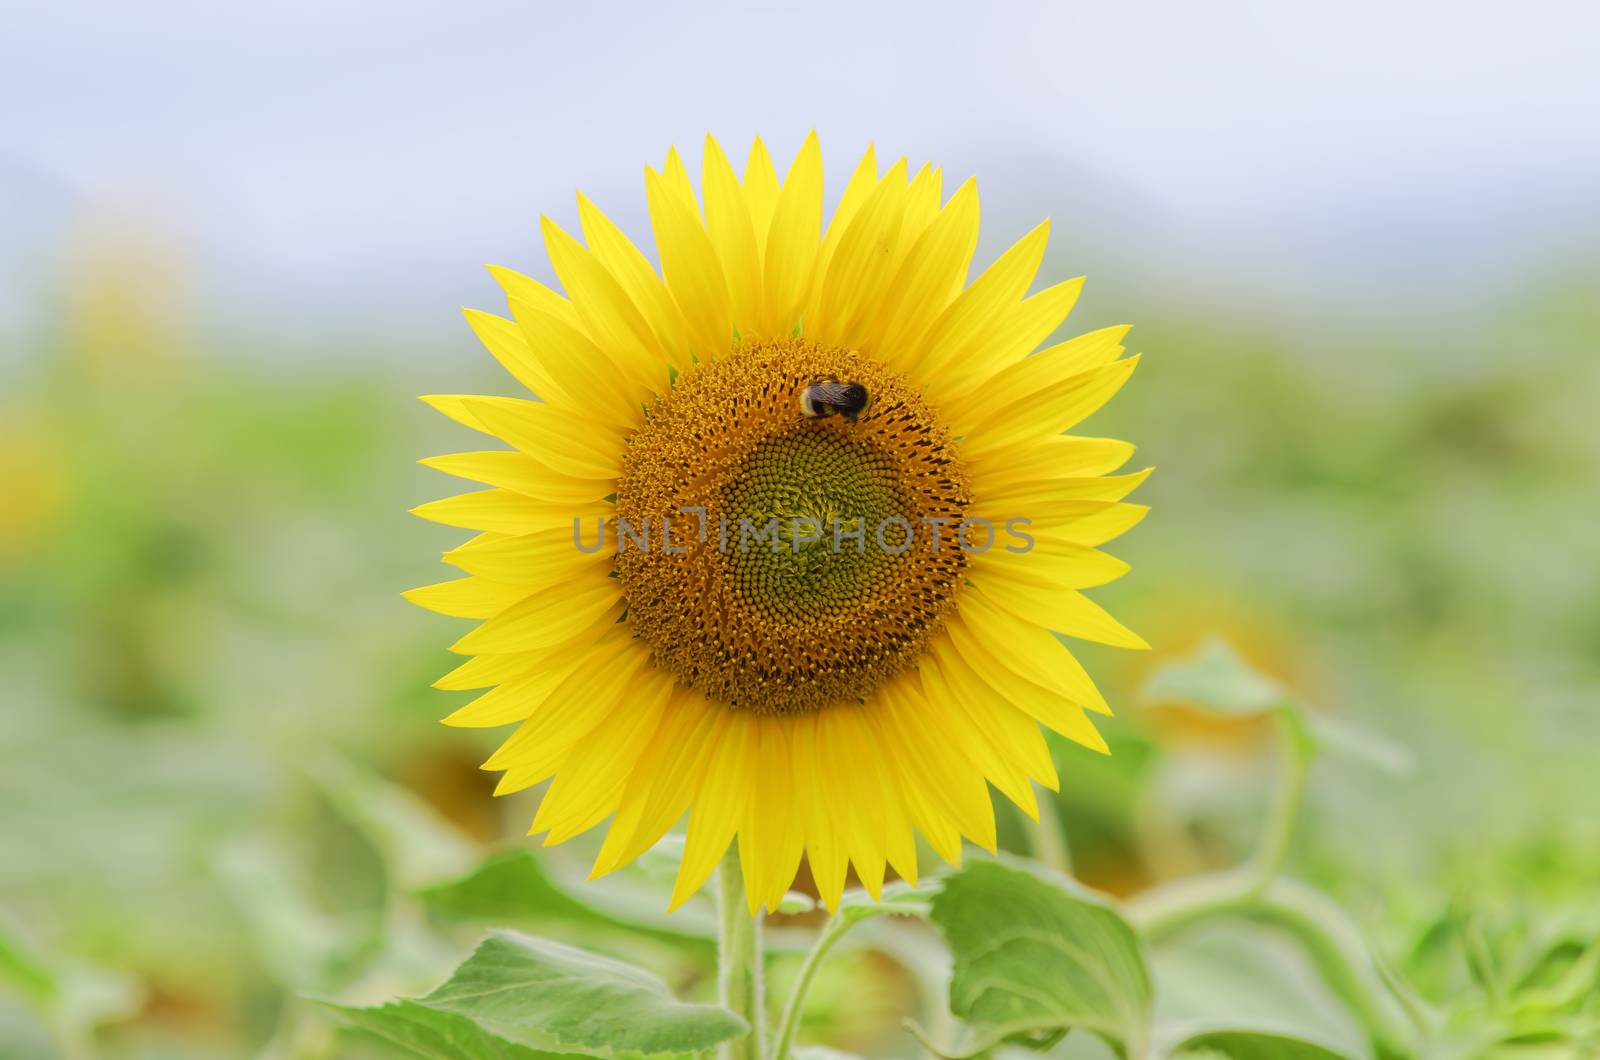 wasp landing on a sunflower